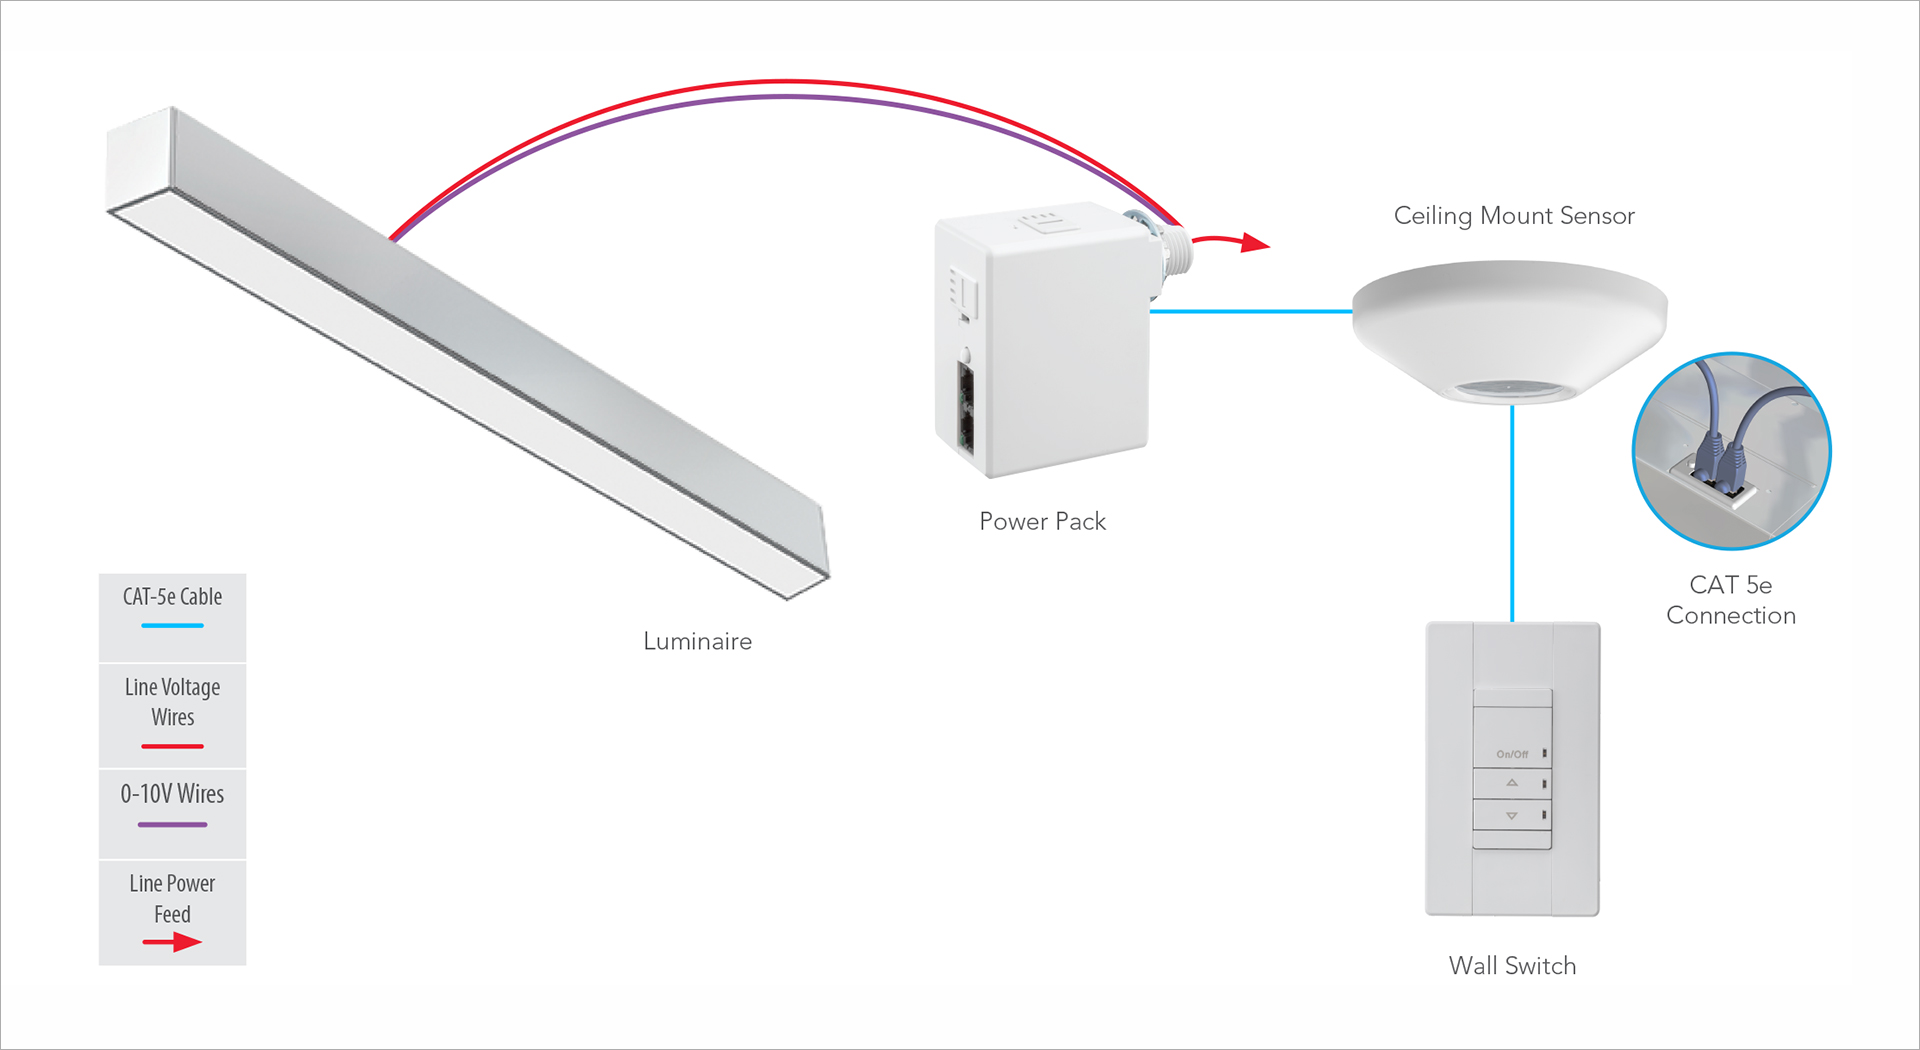 A drawing shows that nLight wired lighting controls use line voltage wires and 0-10V wires between the luminaire and power pack and a CAT-5e cable between the power pack, ceiling mount sensor and wall switch.